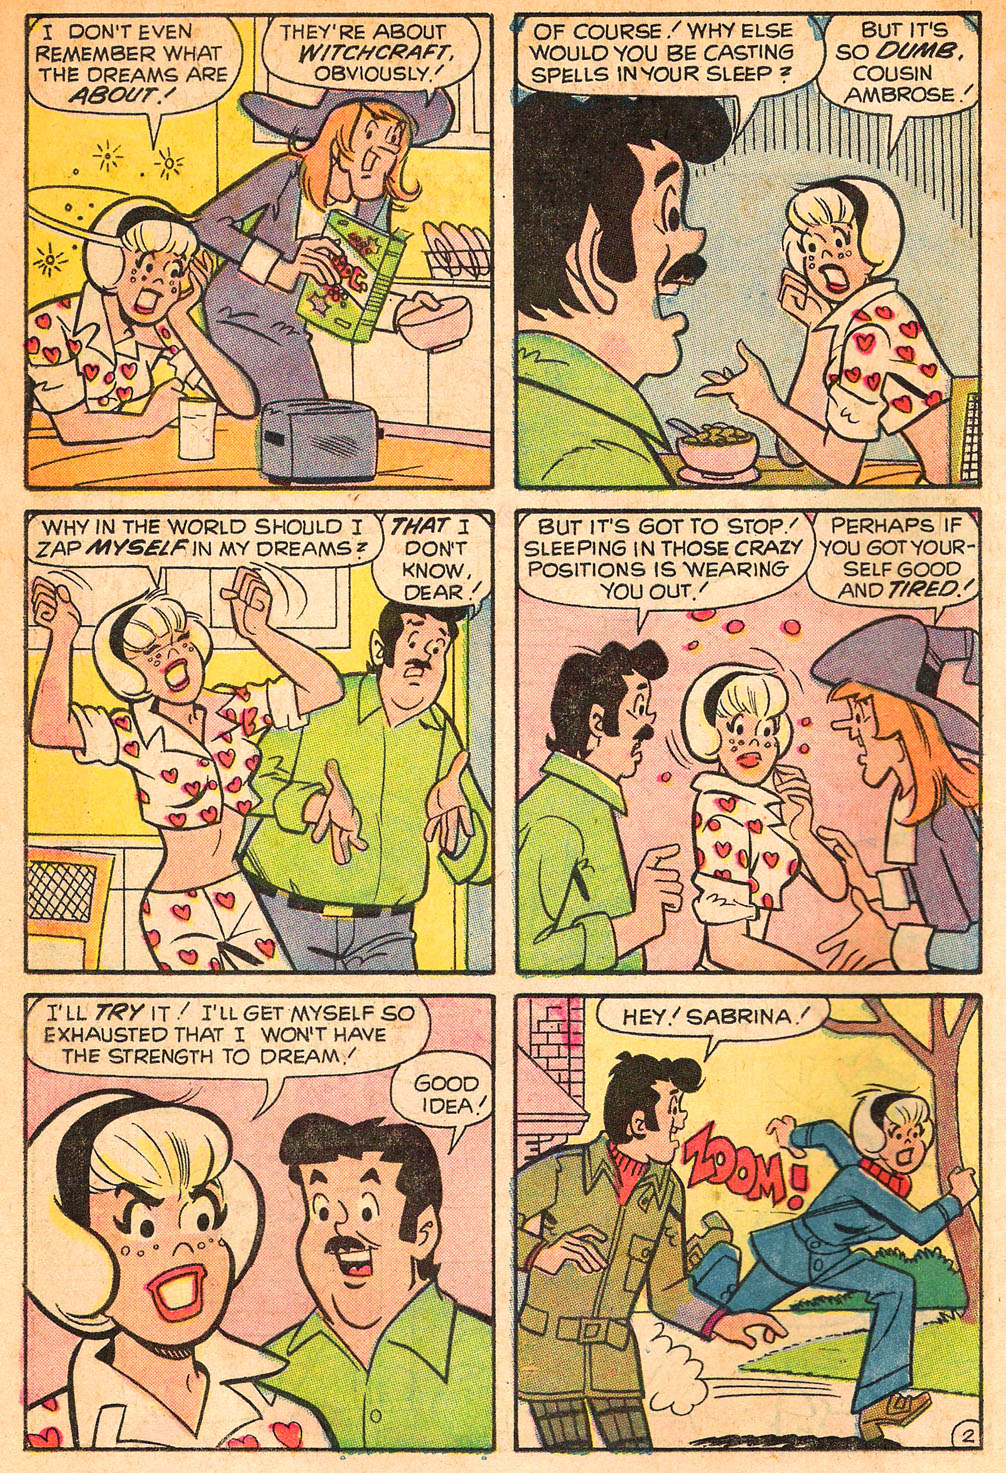 Sabrina The Teenage Witch (1971) Issue #13 #13 - English 11